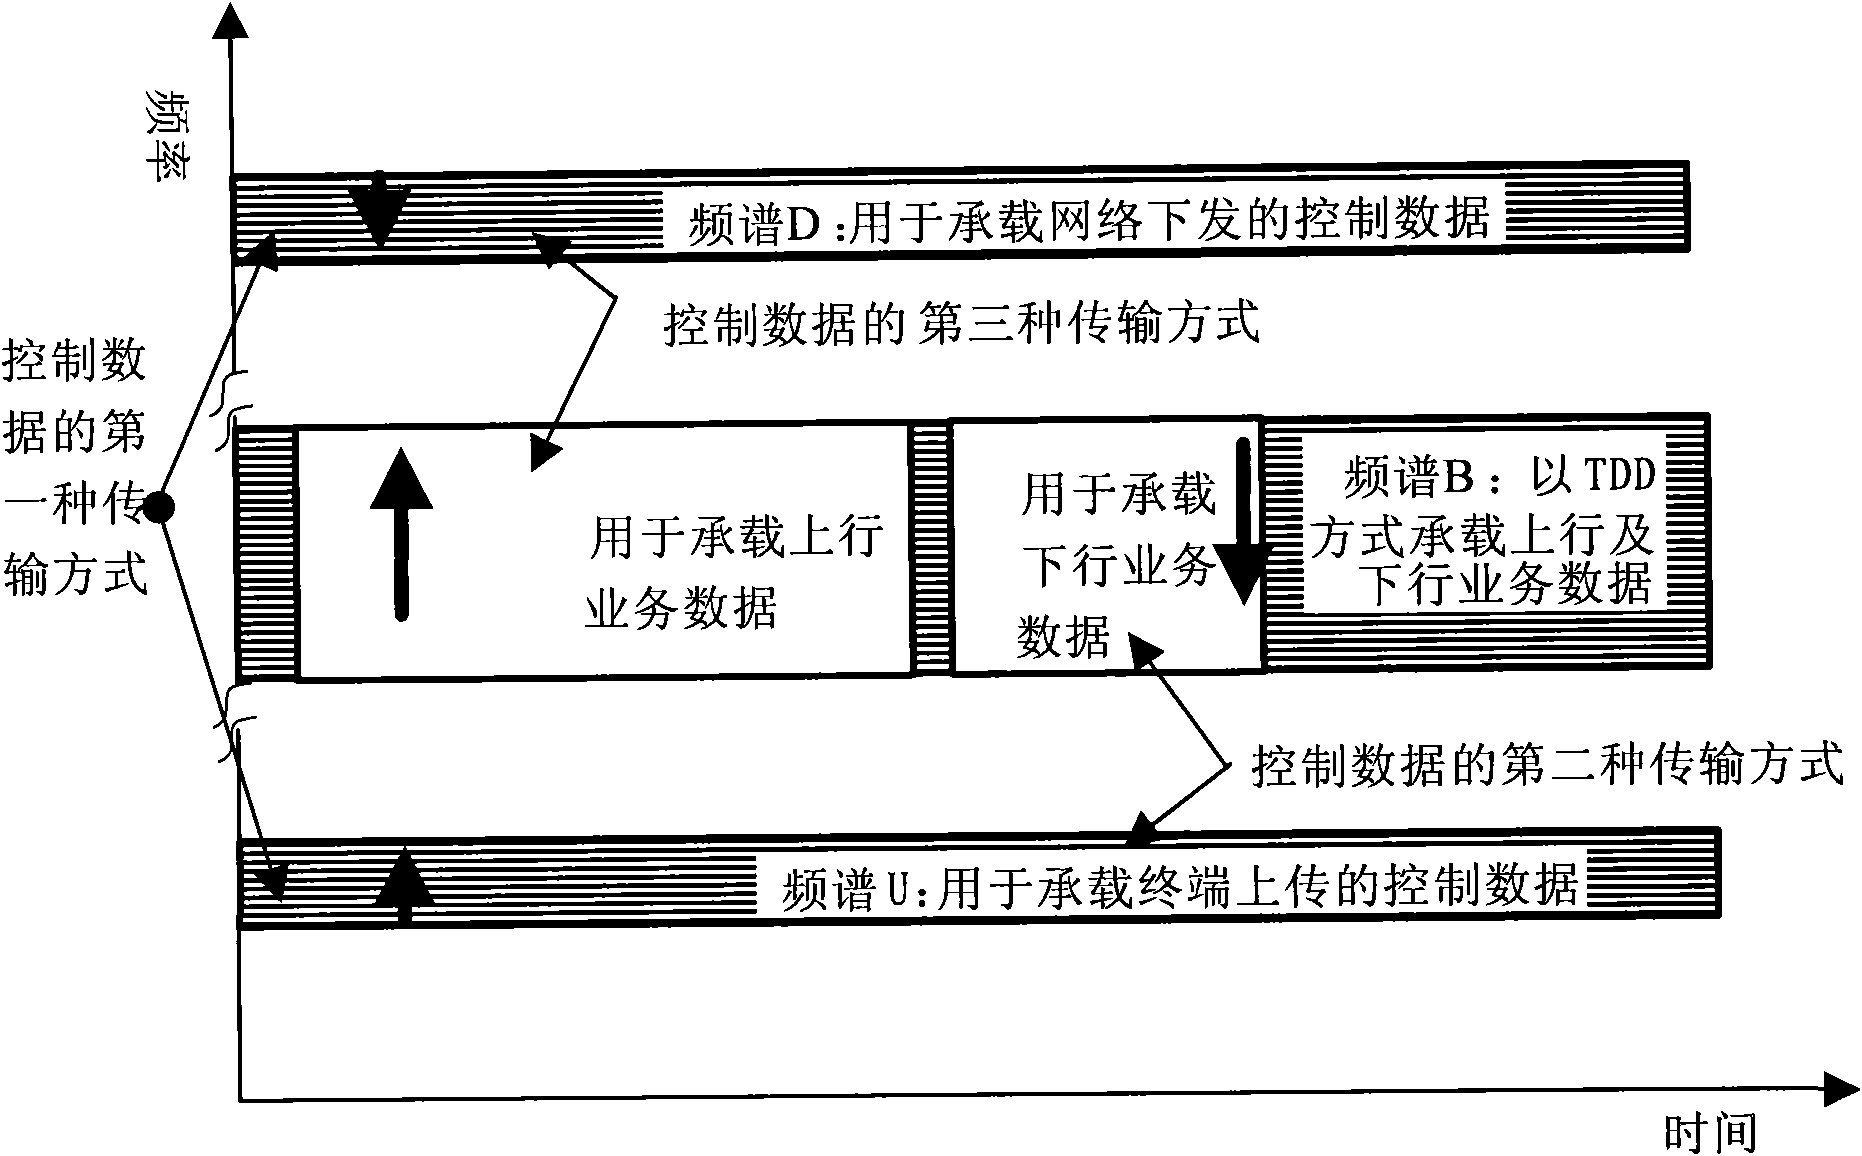 Mixed duplex realization method based on separated service and control as well as data transmission method